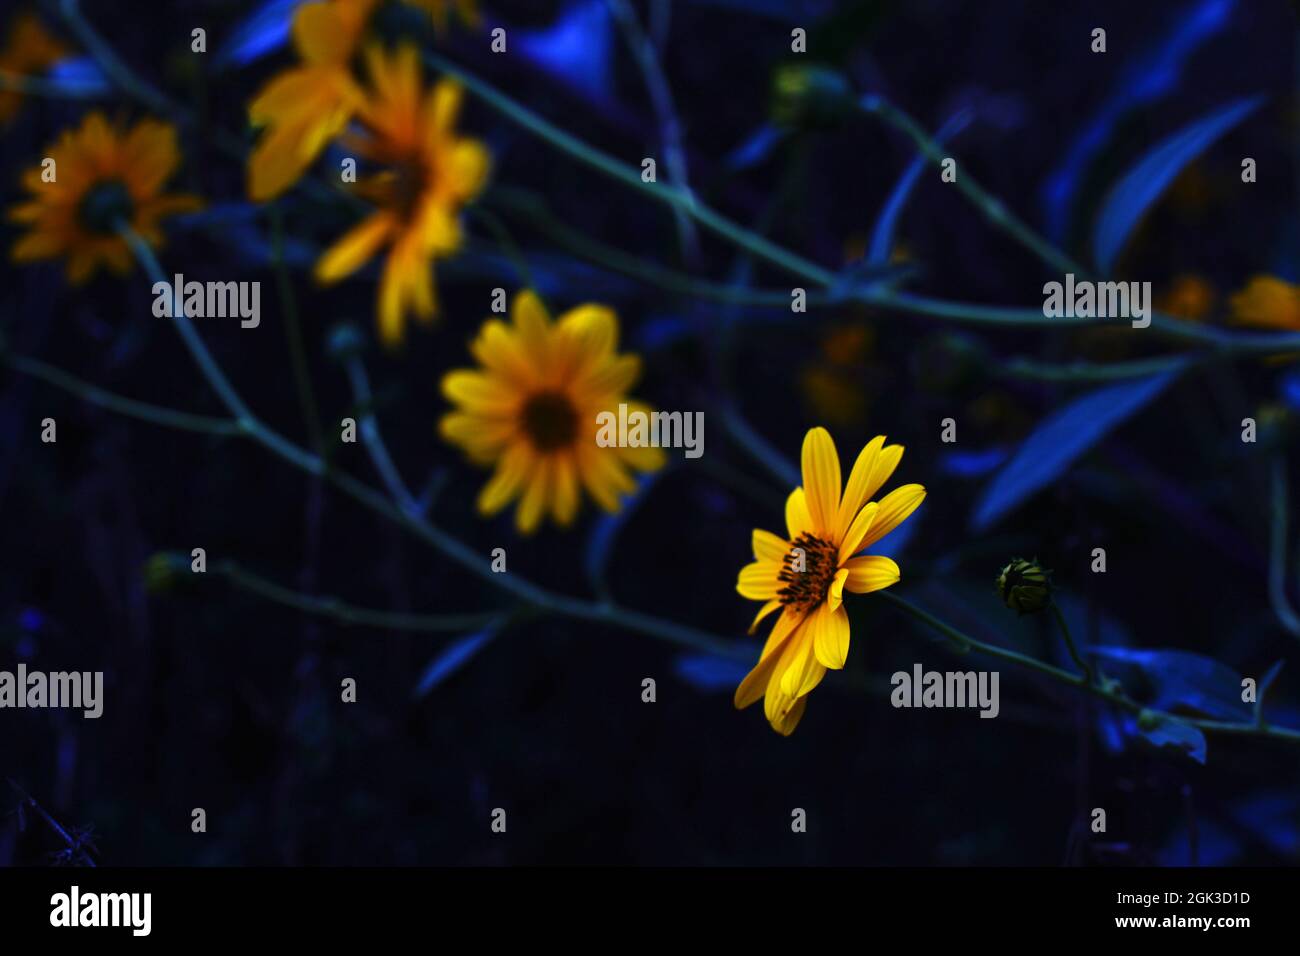 Yellow flowers with a blue background Stock Photo